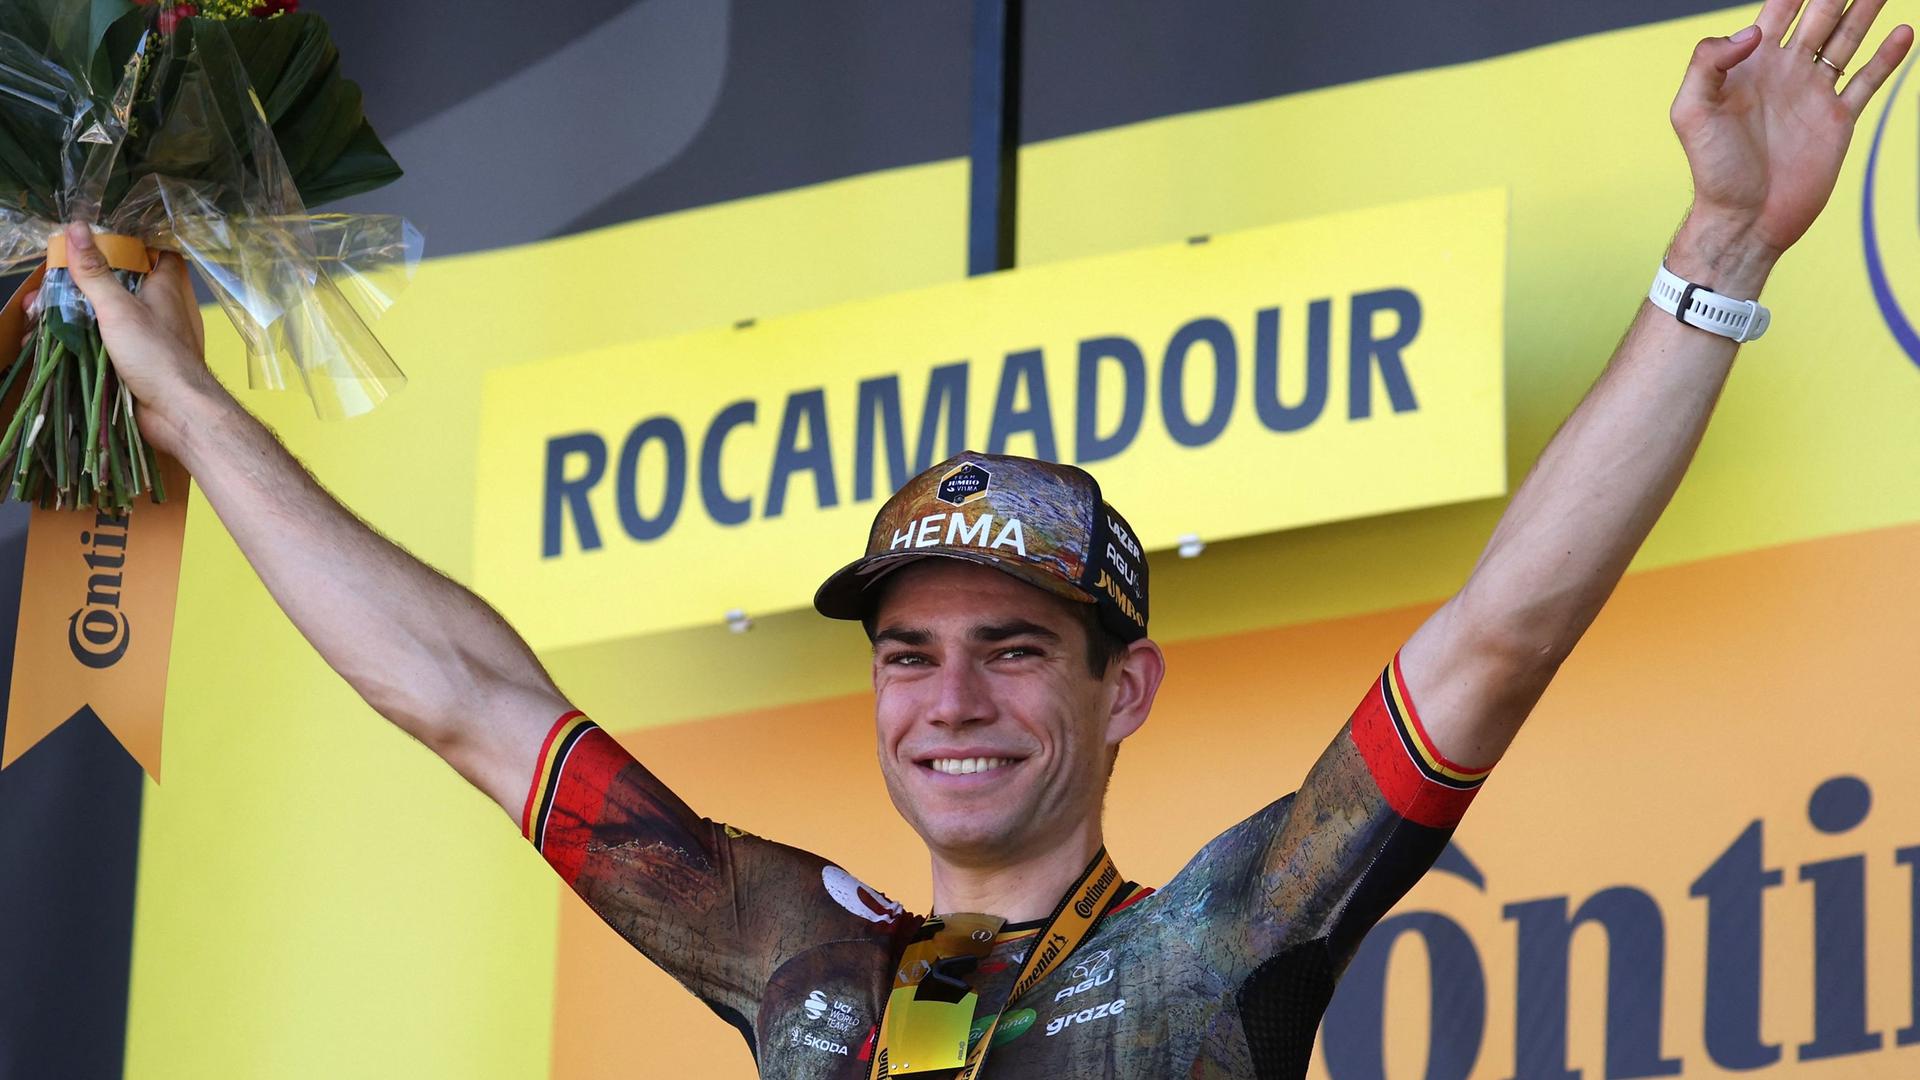 Jumbo-Visma team's Belgian rider Wout Van Aert celebrates his victory on the podium after winning the 20th stage of the 109th edition of the Tour de France cycling race, 40,7 km individual time trial between Lacapelle-Marival and Rocamadour, in southwestern France, on July 23, 2022. (Photo by Thomas SAMSON / AFP)